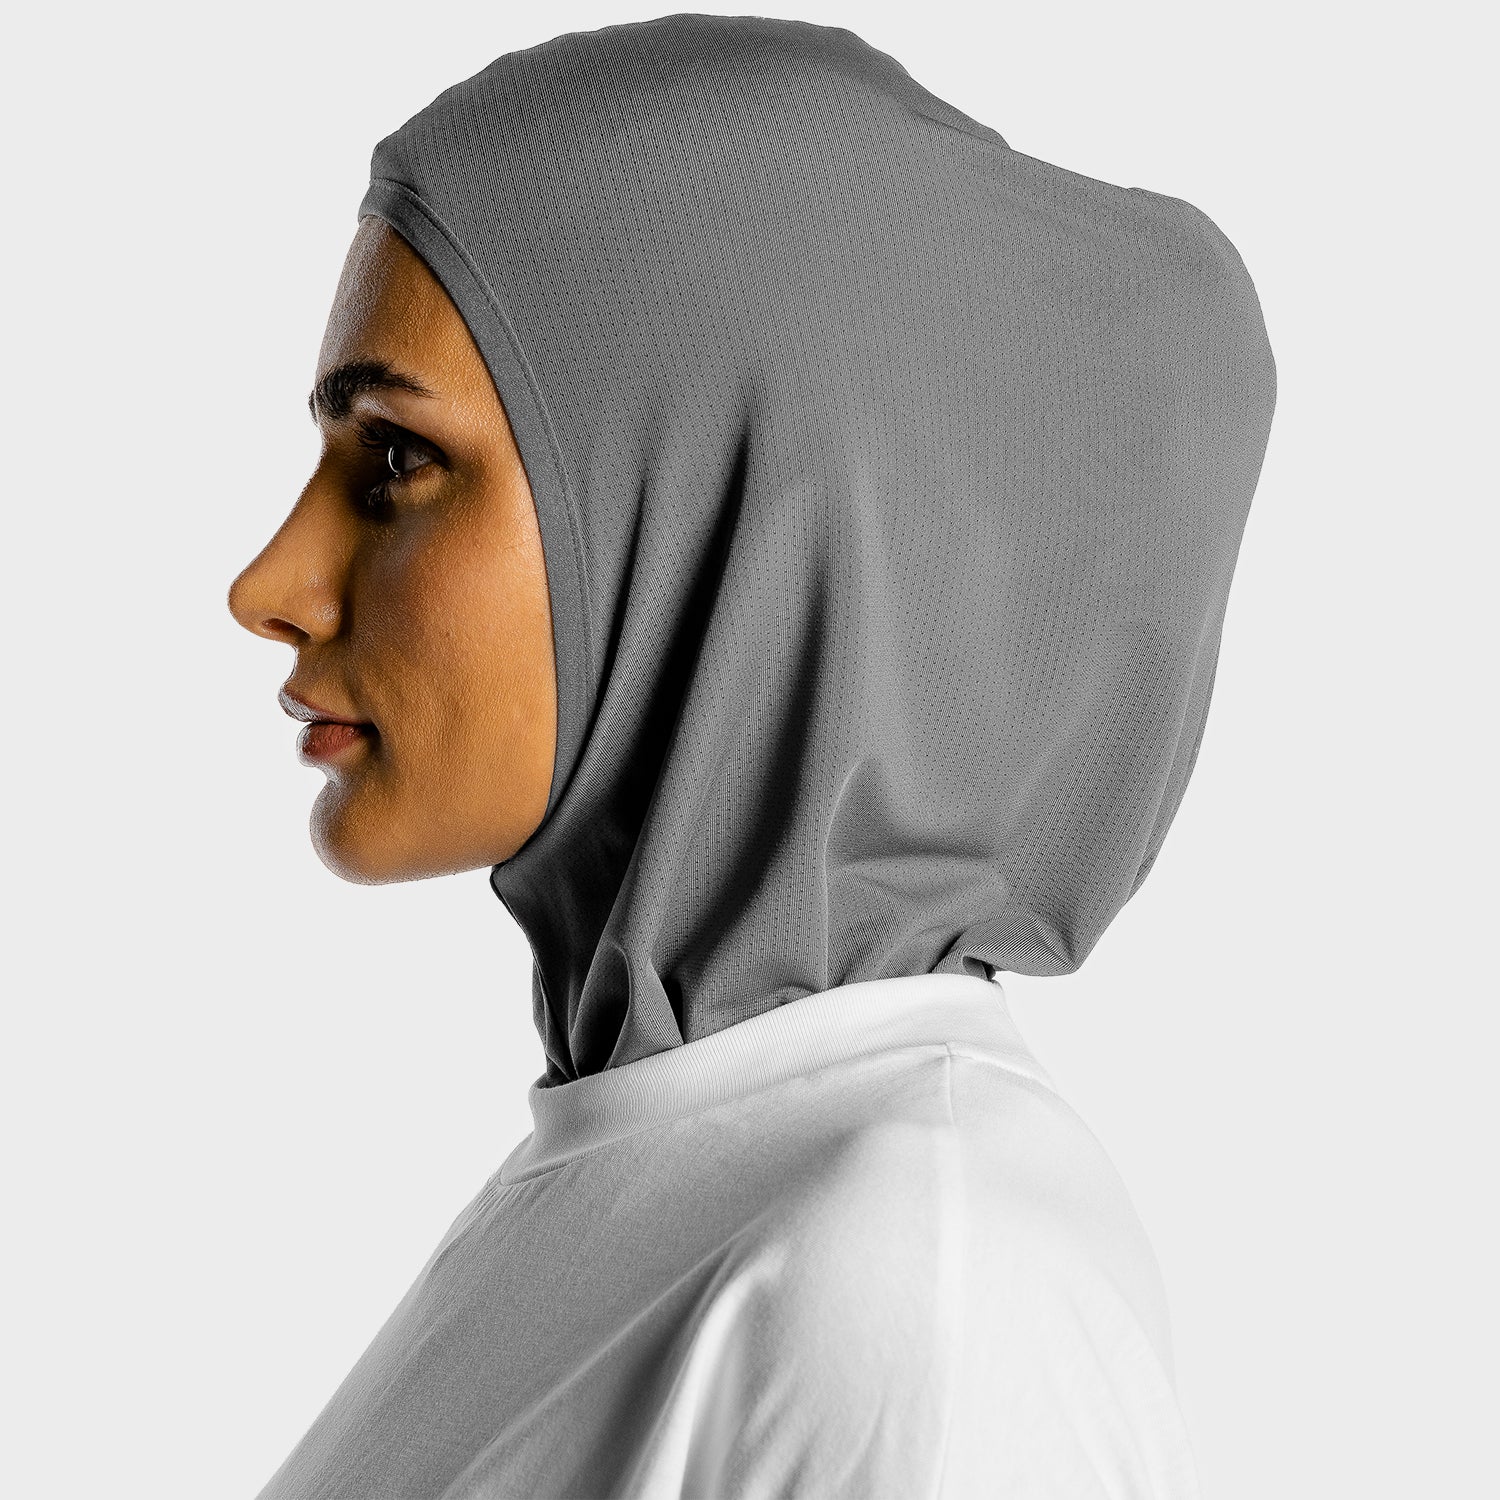 squatwolf-gym-hijab-for-women-noor-hijab-grey-workout-clothes